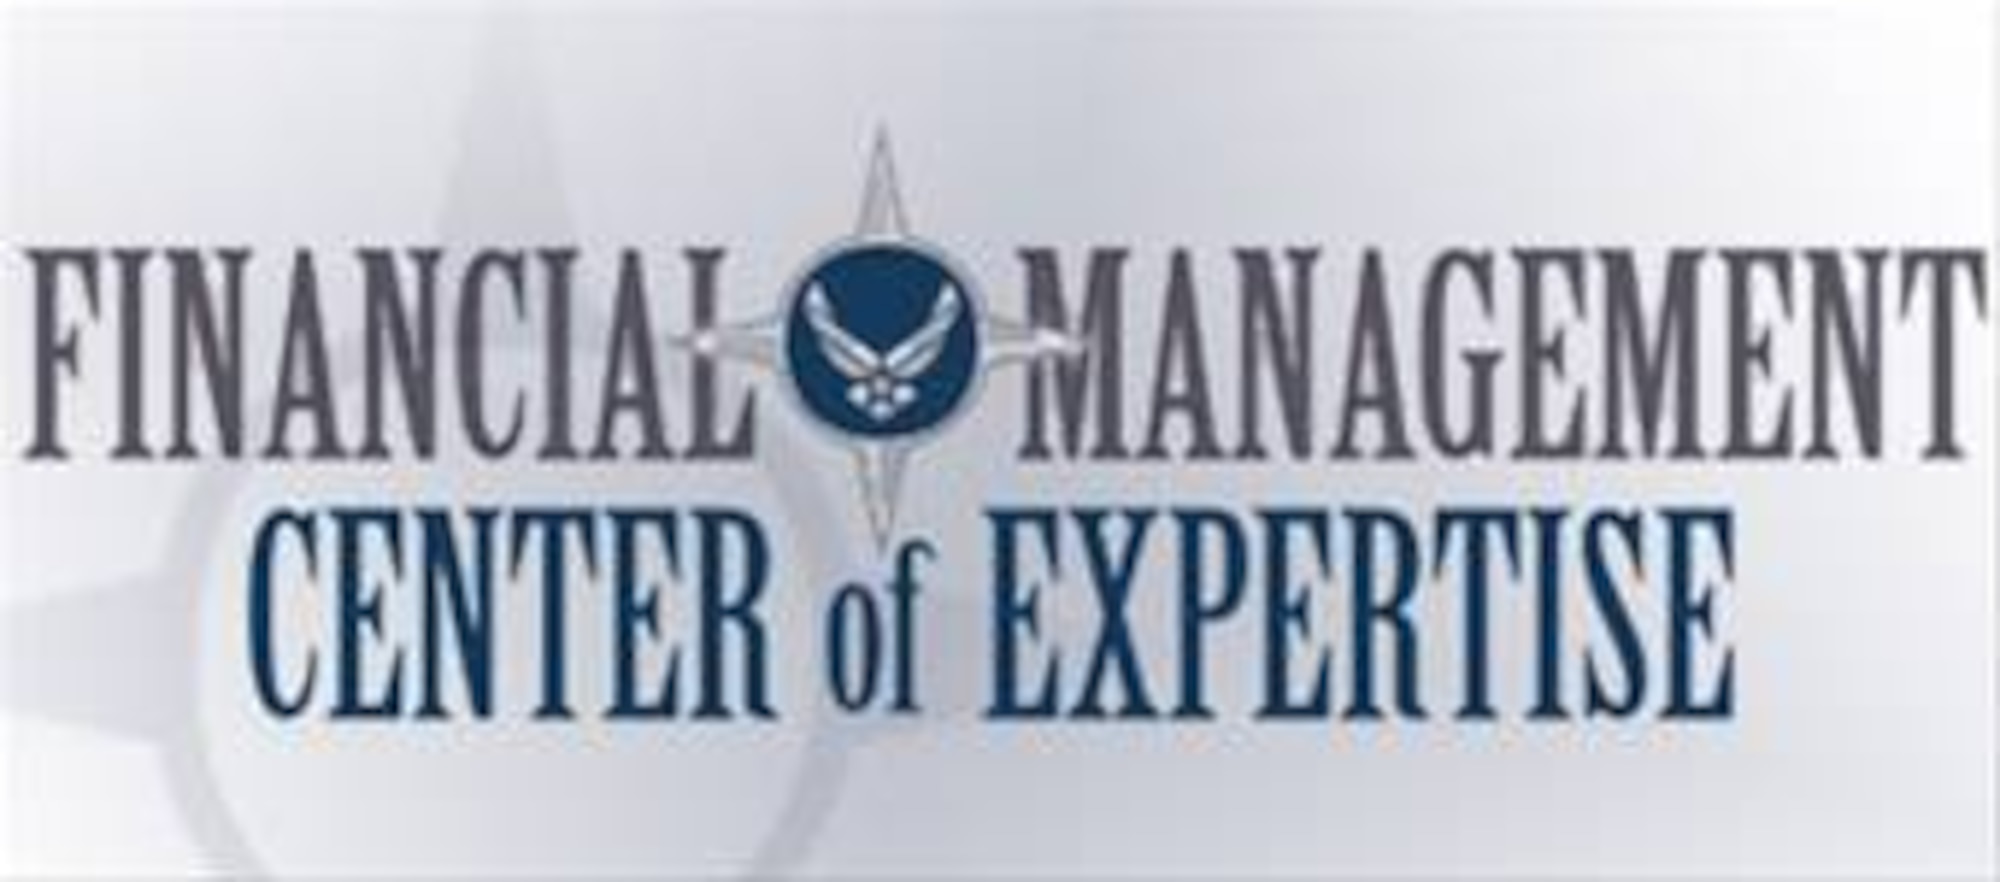 Air Force Financial Management Center of Expertise logo provided by Scott Vadnais and designed by the Air Force Graphics office. 